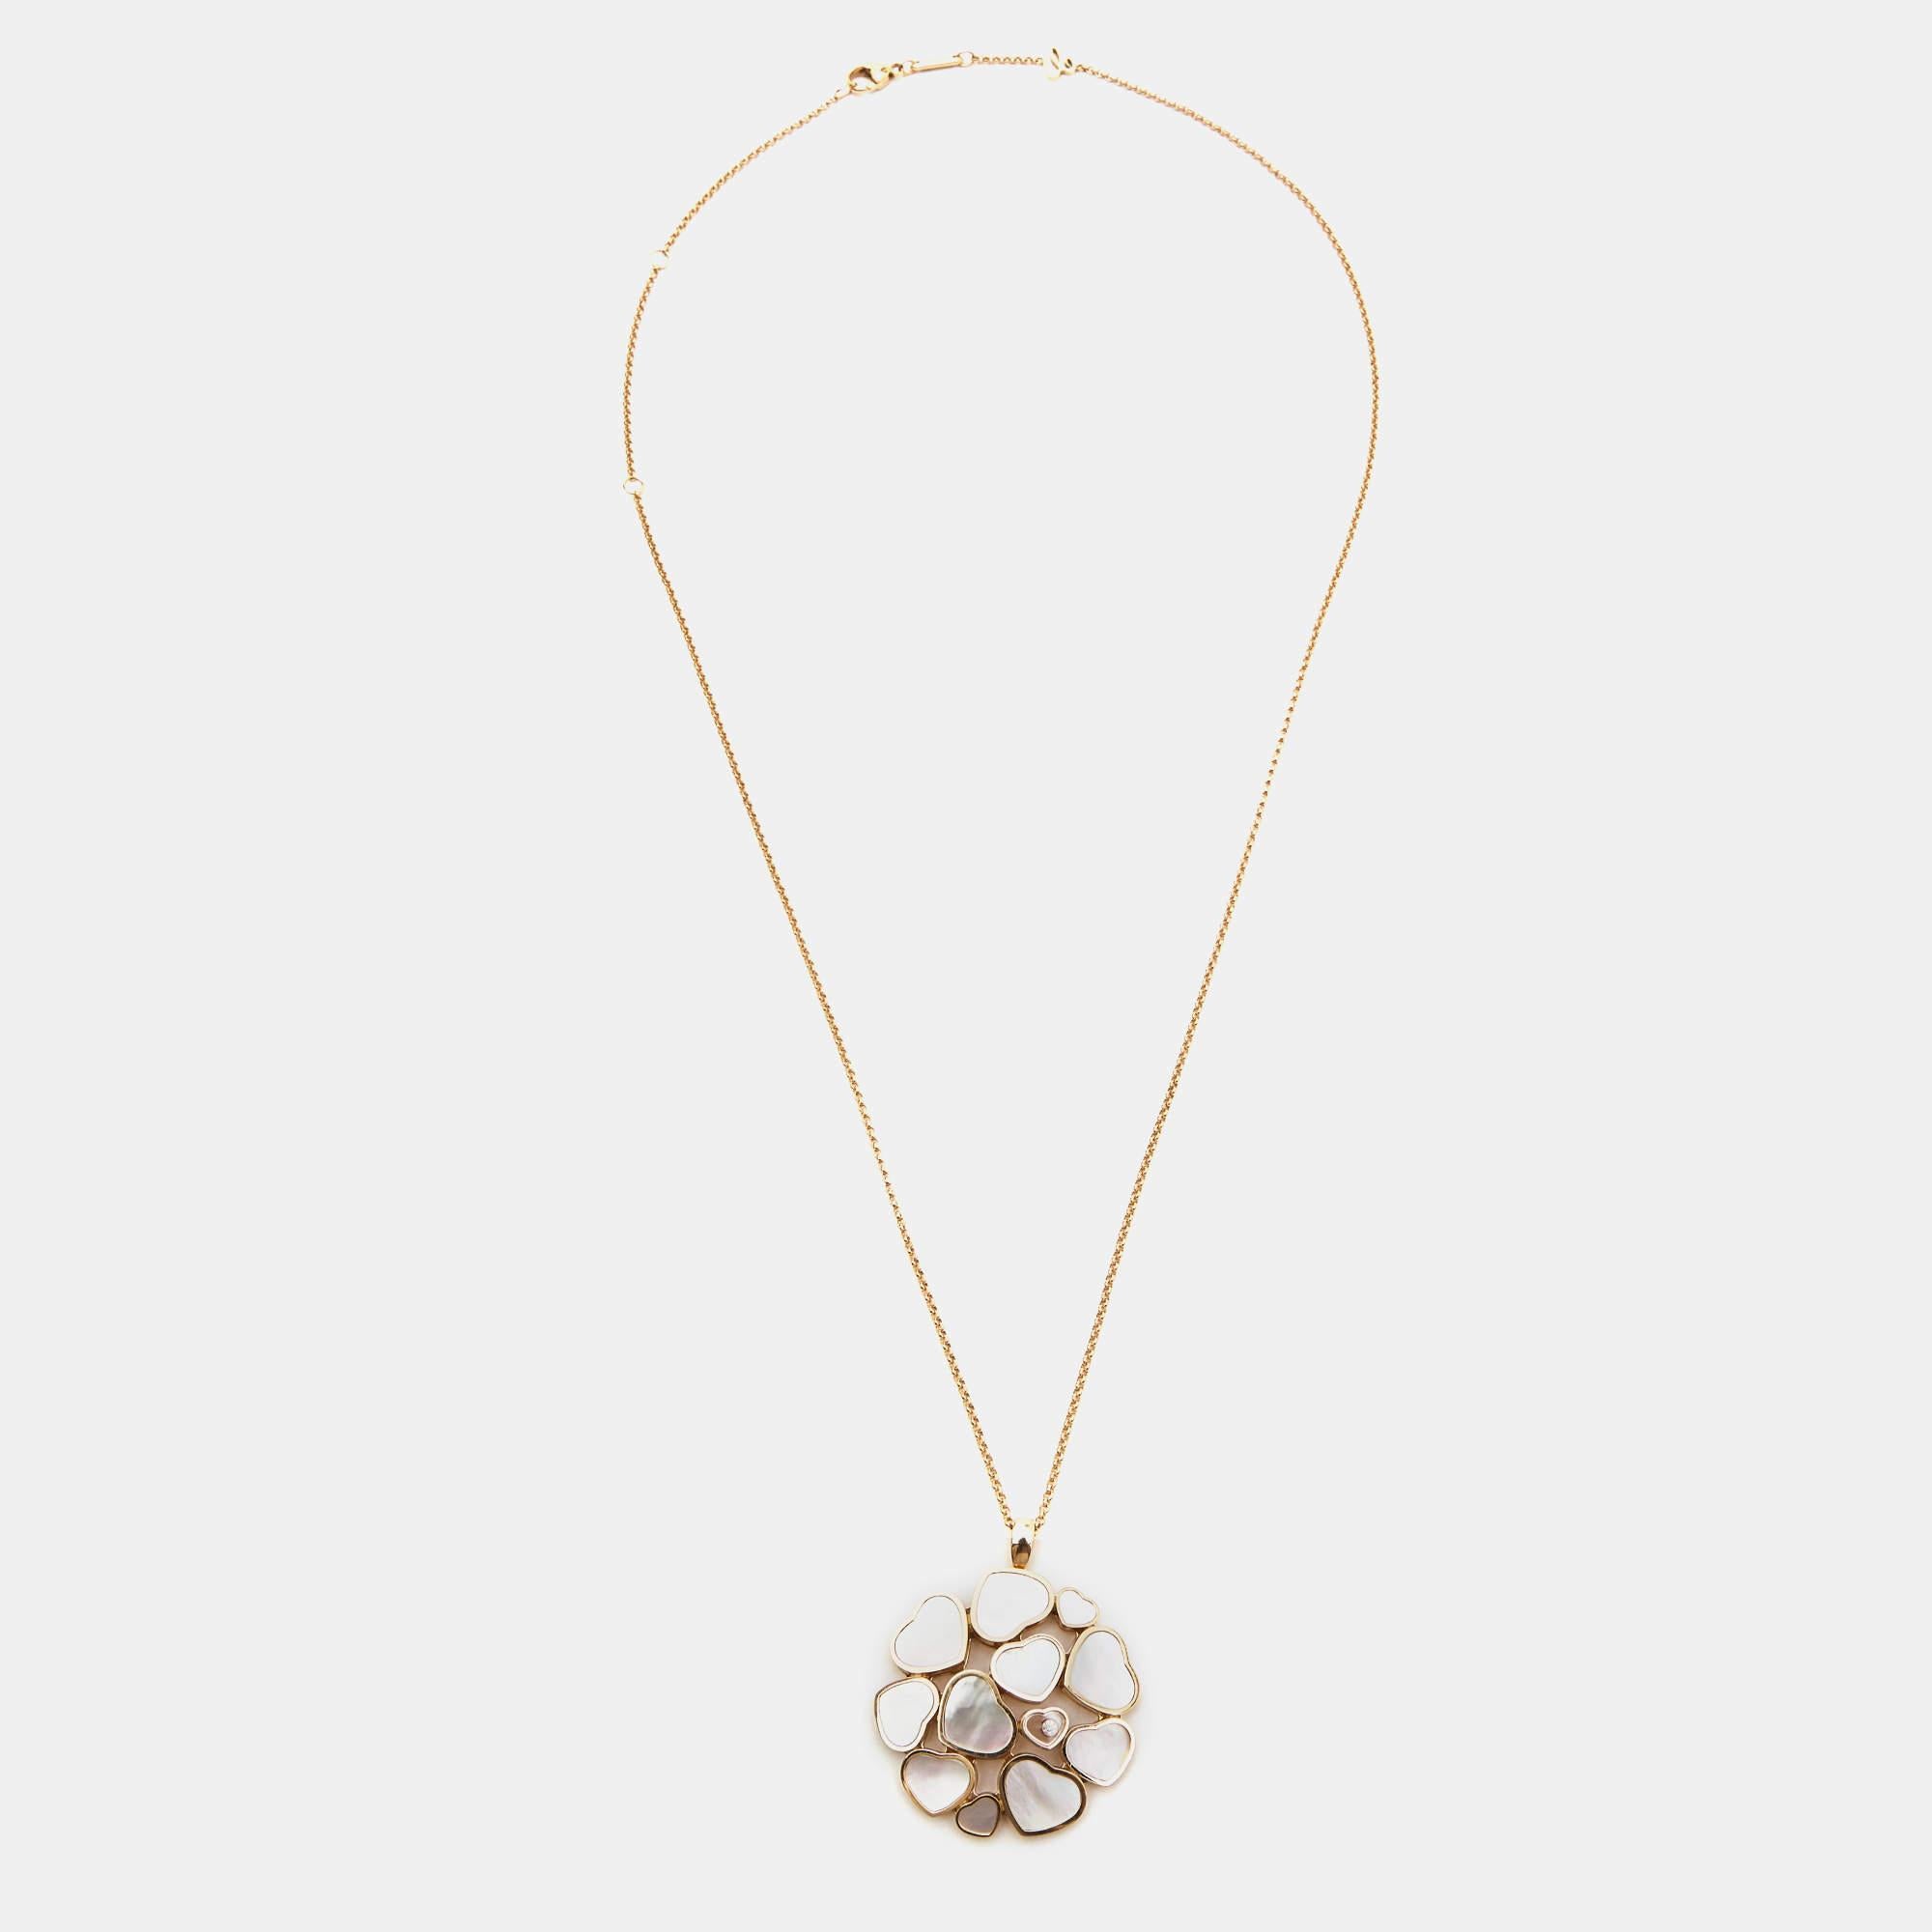 Delicately crafted, the Chopard Happy Hearts necklace exudes timeless grace. Fashioned from 18k rose gold, its pendant features a captivating mother-of-pearl heart embraced by sparkling diamonds, symbolizing love and elegance. This exquisite piece